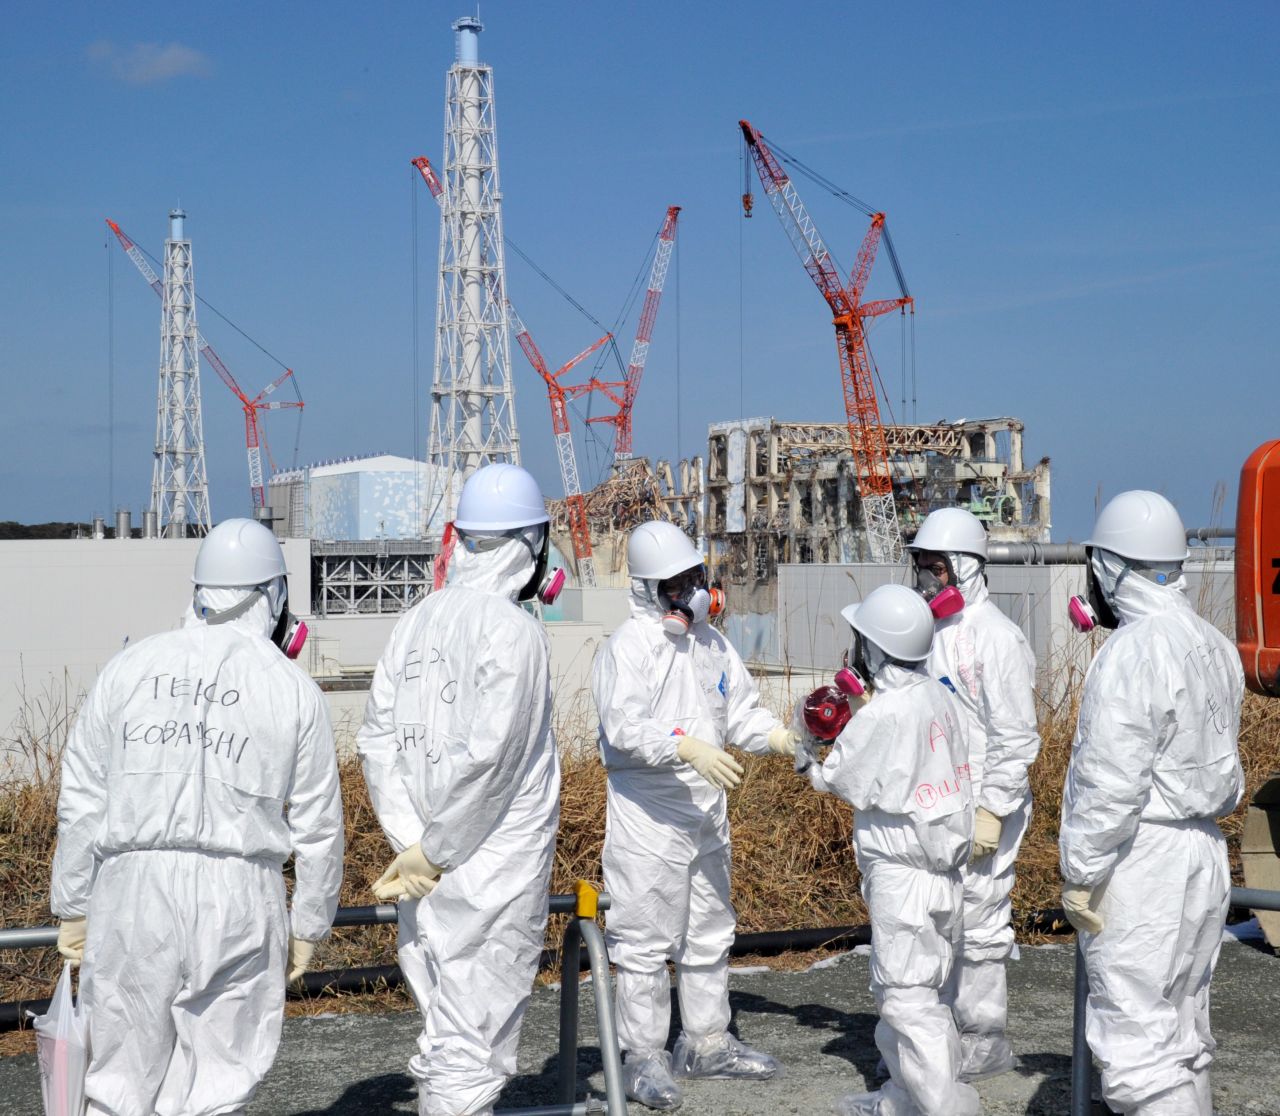 A Tokyo Electric Power Co. worker describes the situation a year after the disaster at Fukushima to journalists on February 28. 